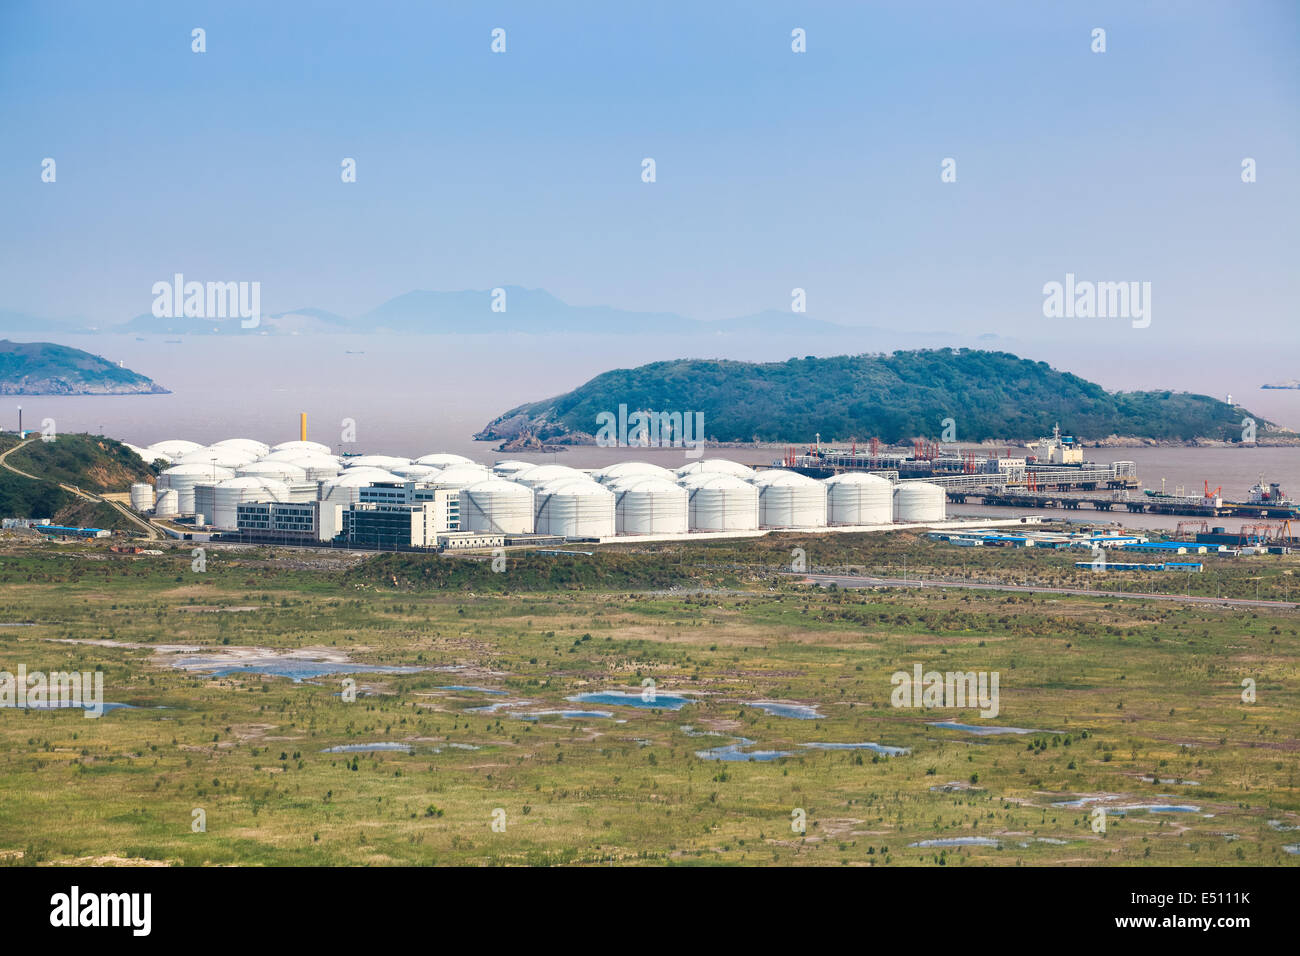 oil tanks at the port Stock Photo